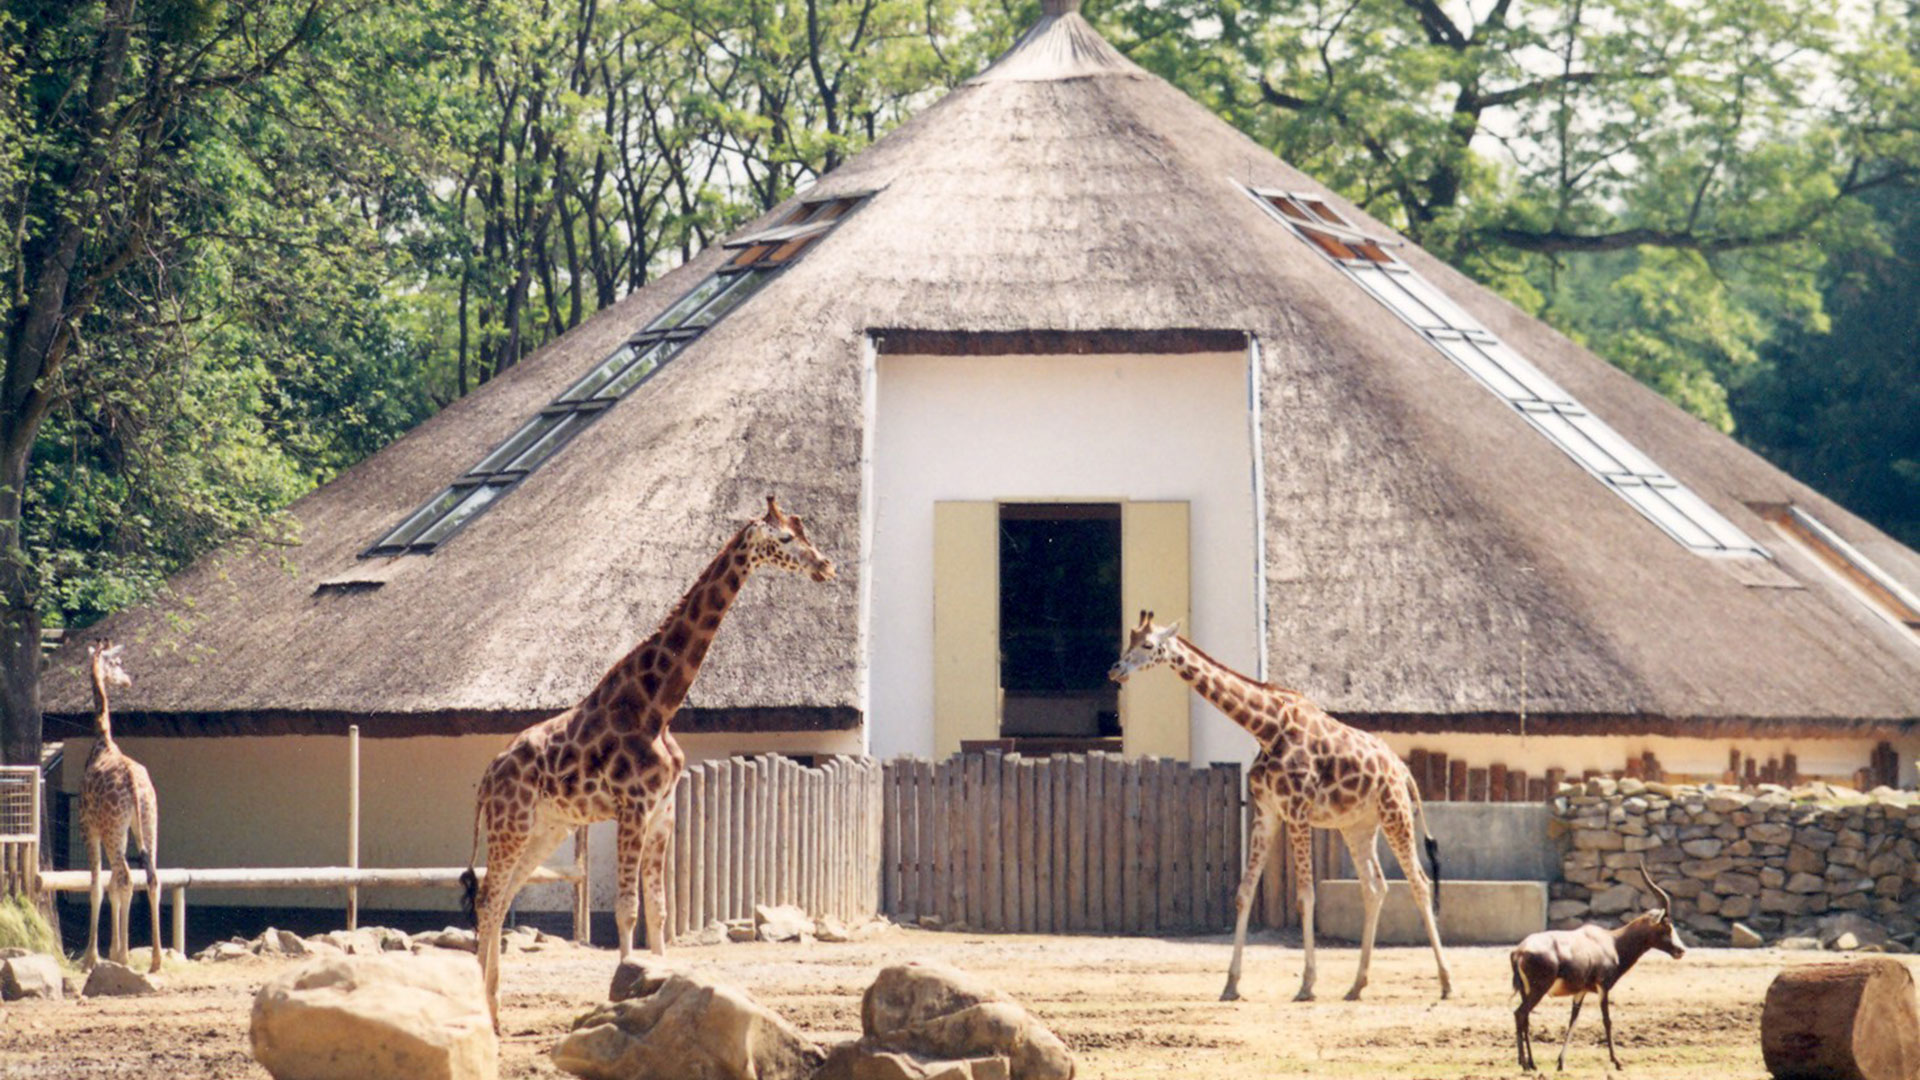 House of African Hoofed animals